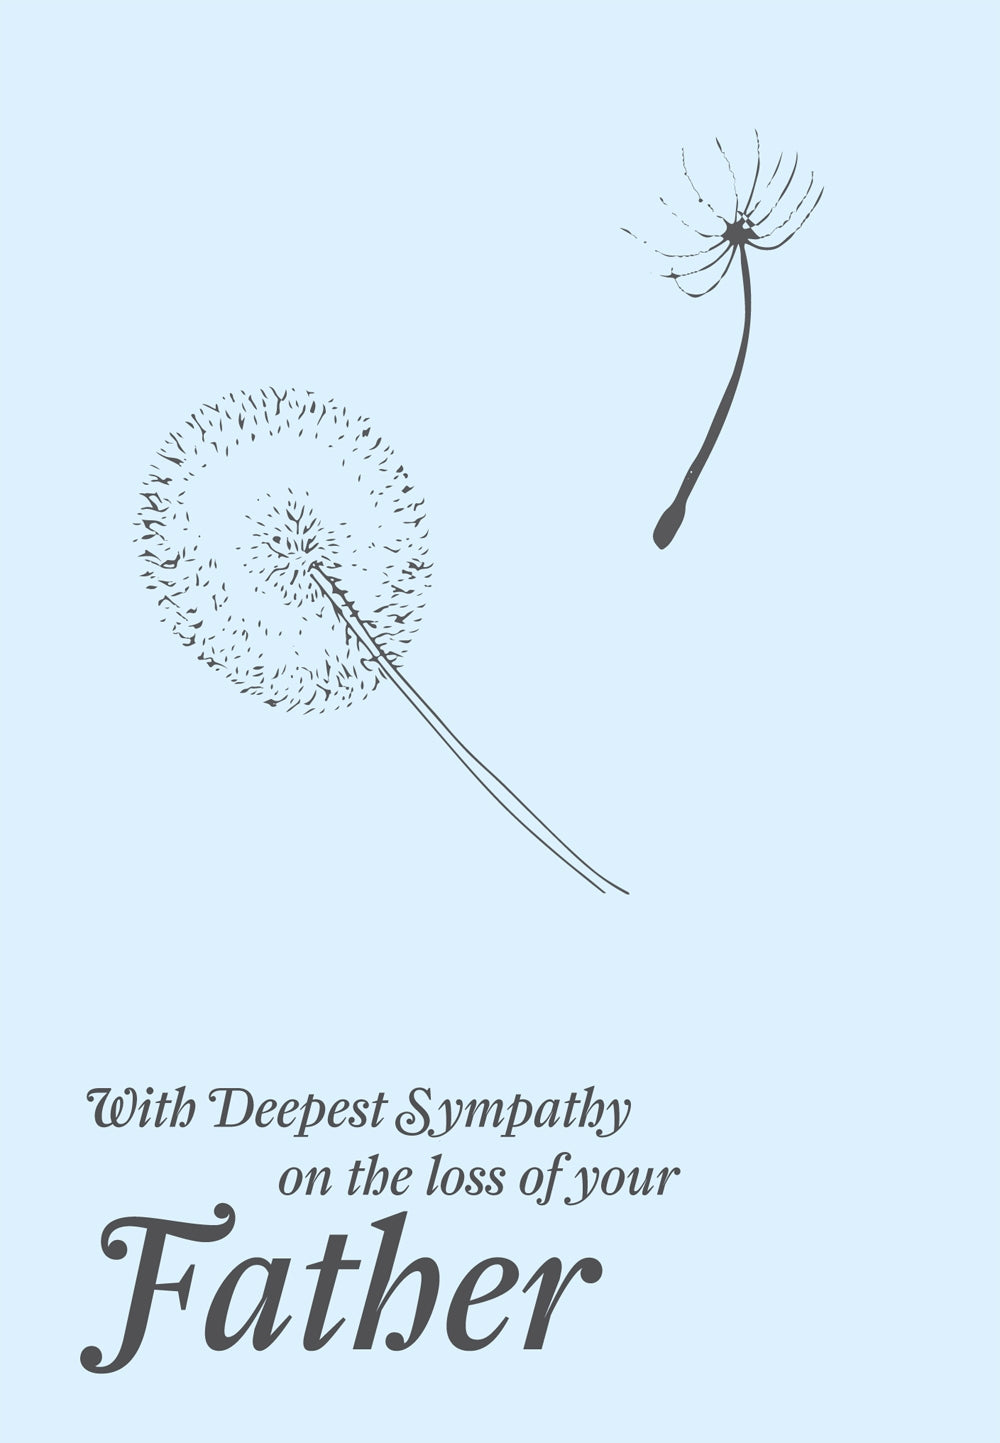 With Deepest Sympathy - Dandelion Std Card Gloss (6 Pack)With Deepest Sympathy - Dandelion Std Card Gloss (6 Pack)